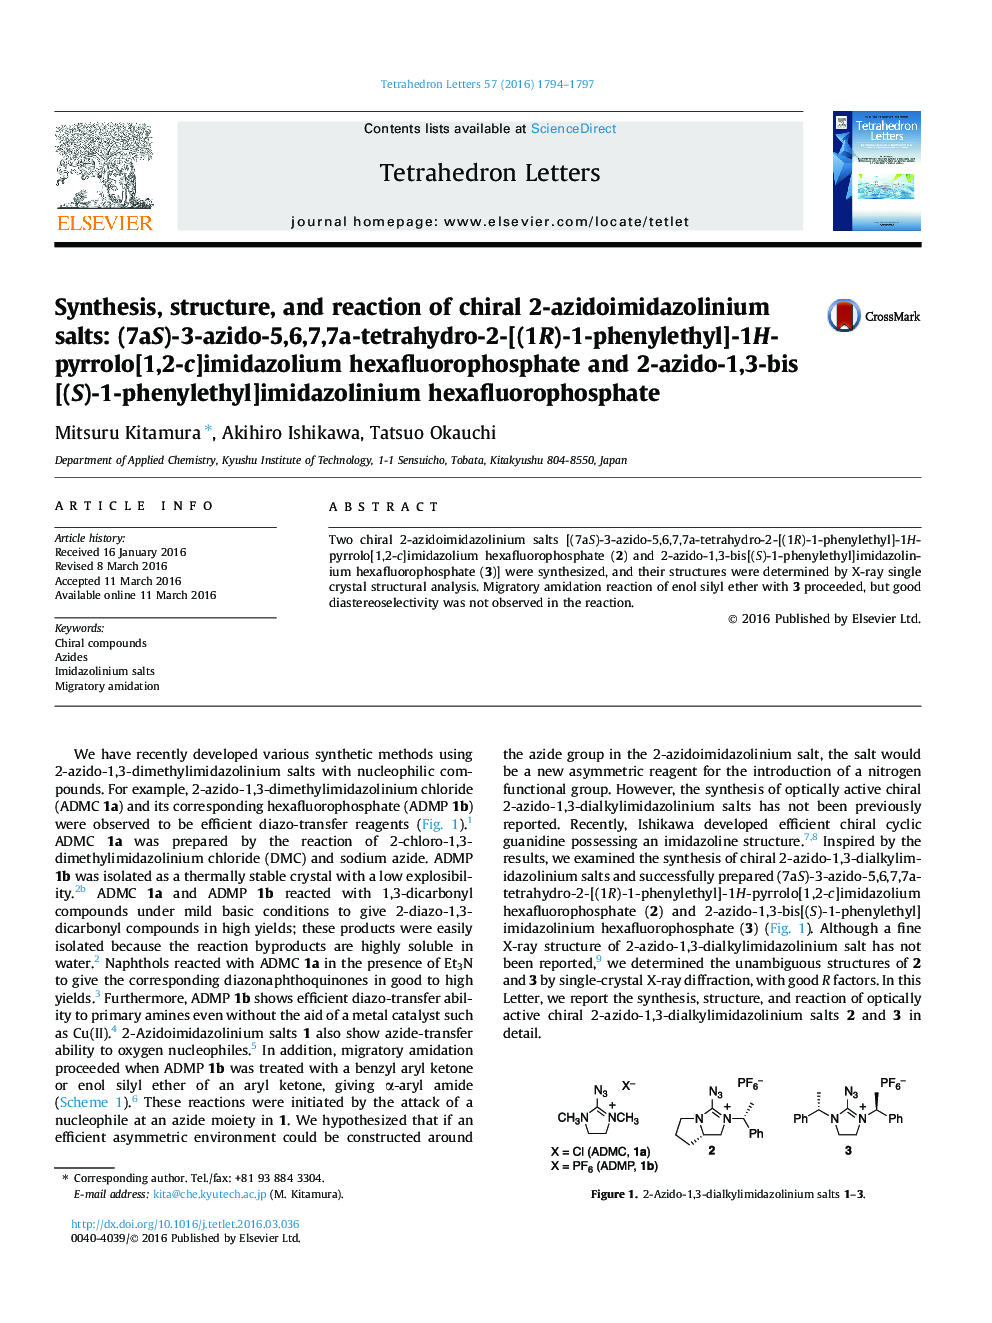 Synthesis, structure, and reaction of chiral 2-azidoimidazolinium salts: (7aS)-3-azido-5,6,7,7a-tetrahydro-2-[(1R)-1-phenylethyl]-1H-pyrrolo[1,2-c]imidazolium hexafluorophosphate and 2-azido-1,3-bis[(S)-1-phenylethyl]imidazolinium hexafluorophosphate